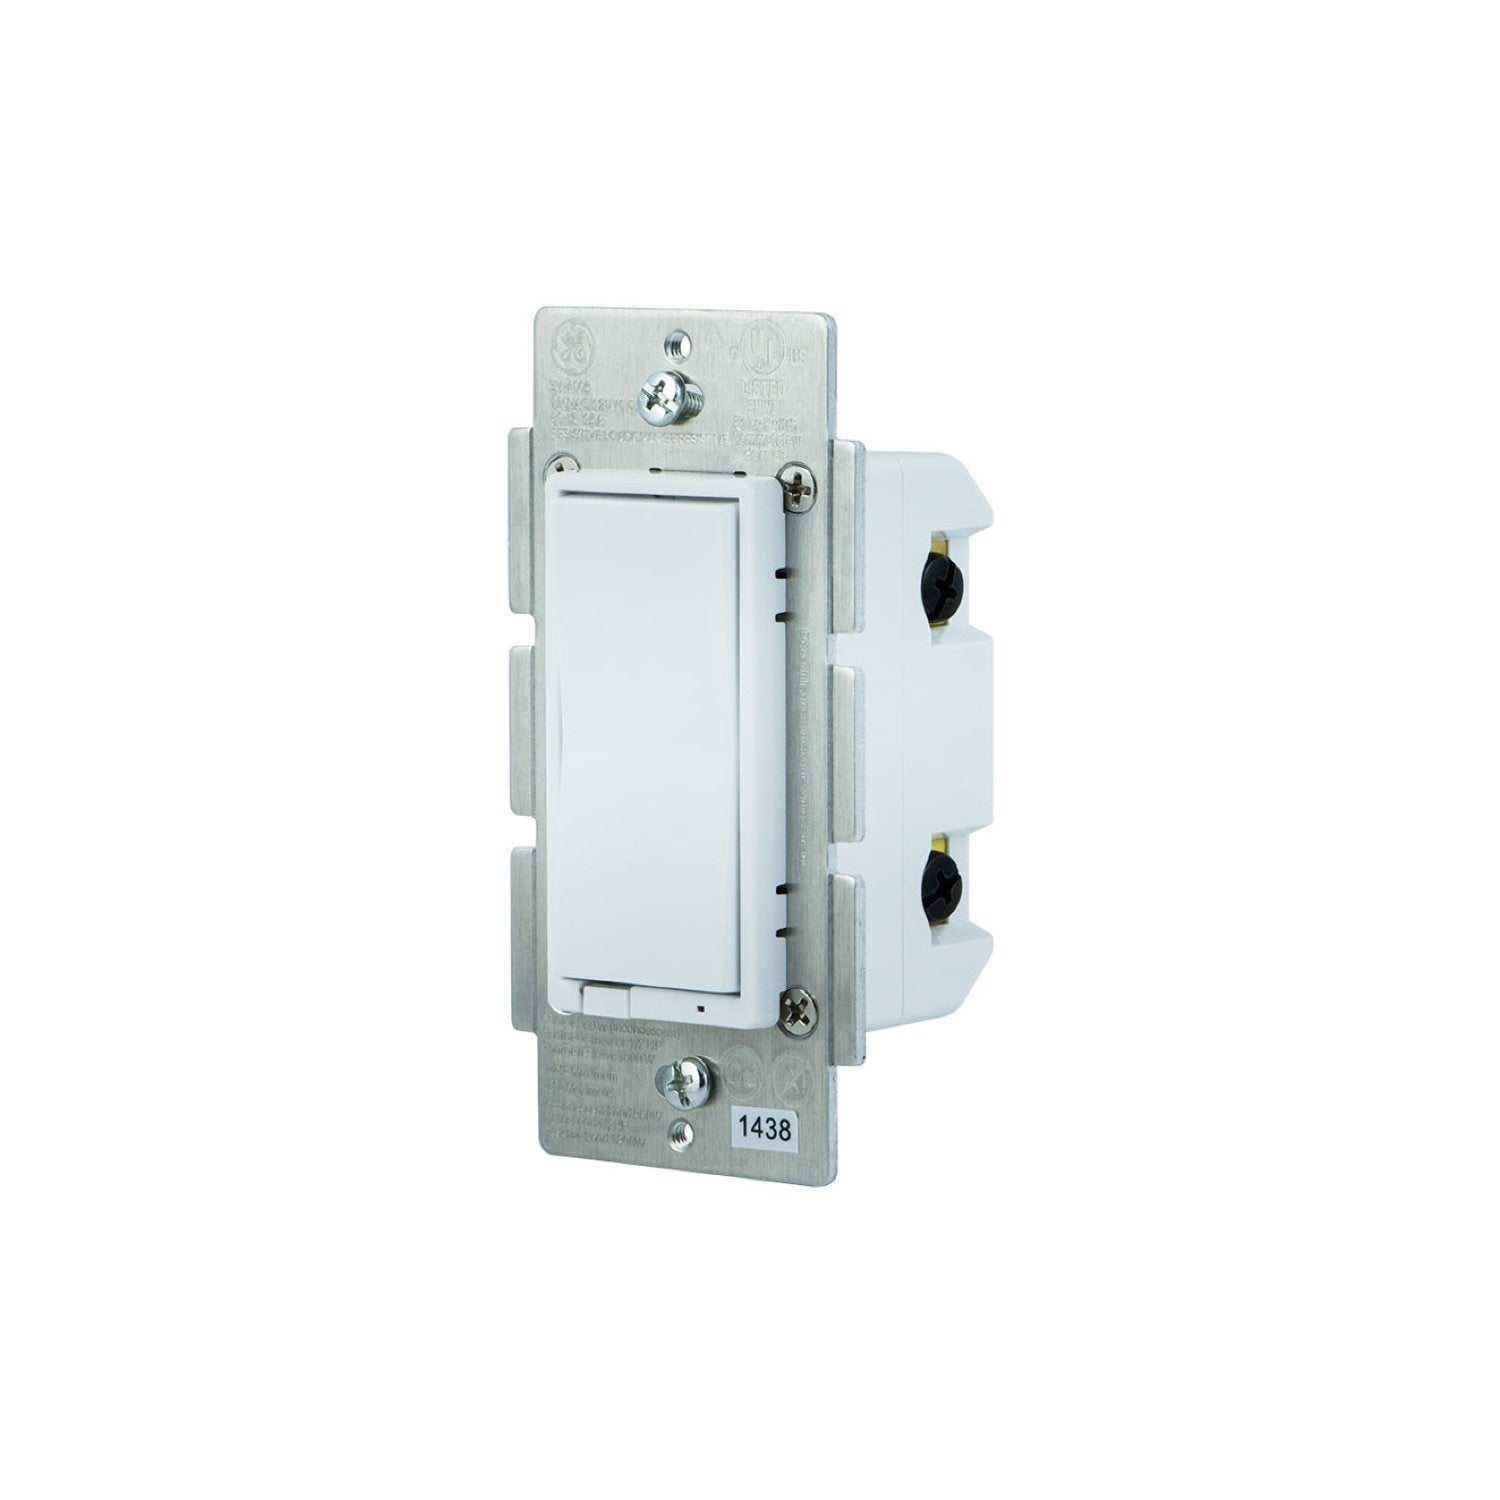 GE In-Wall Paddle Switch (for Works with Ring Alarm Security System) - White